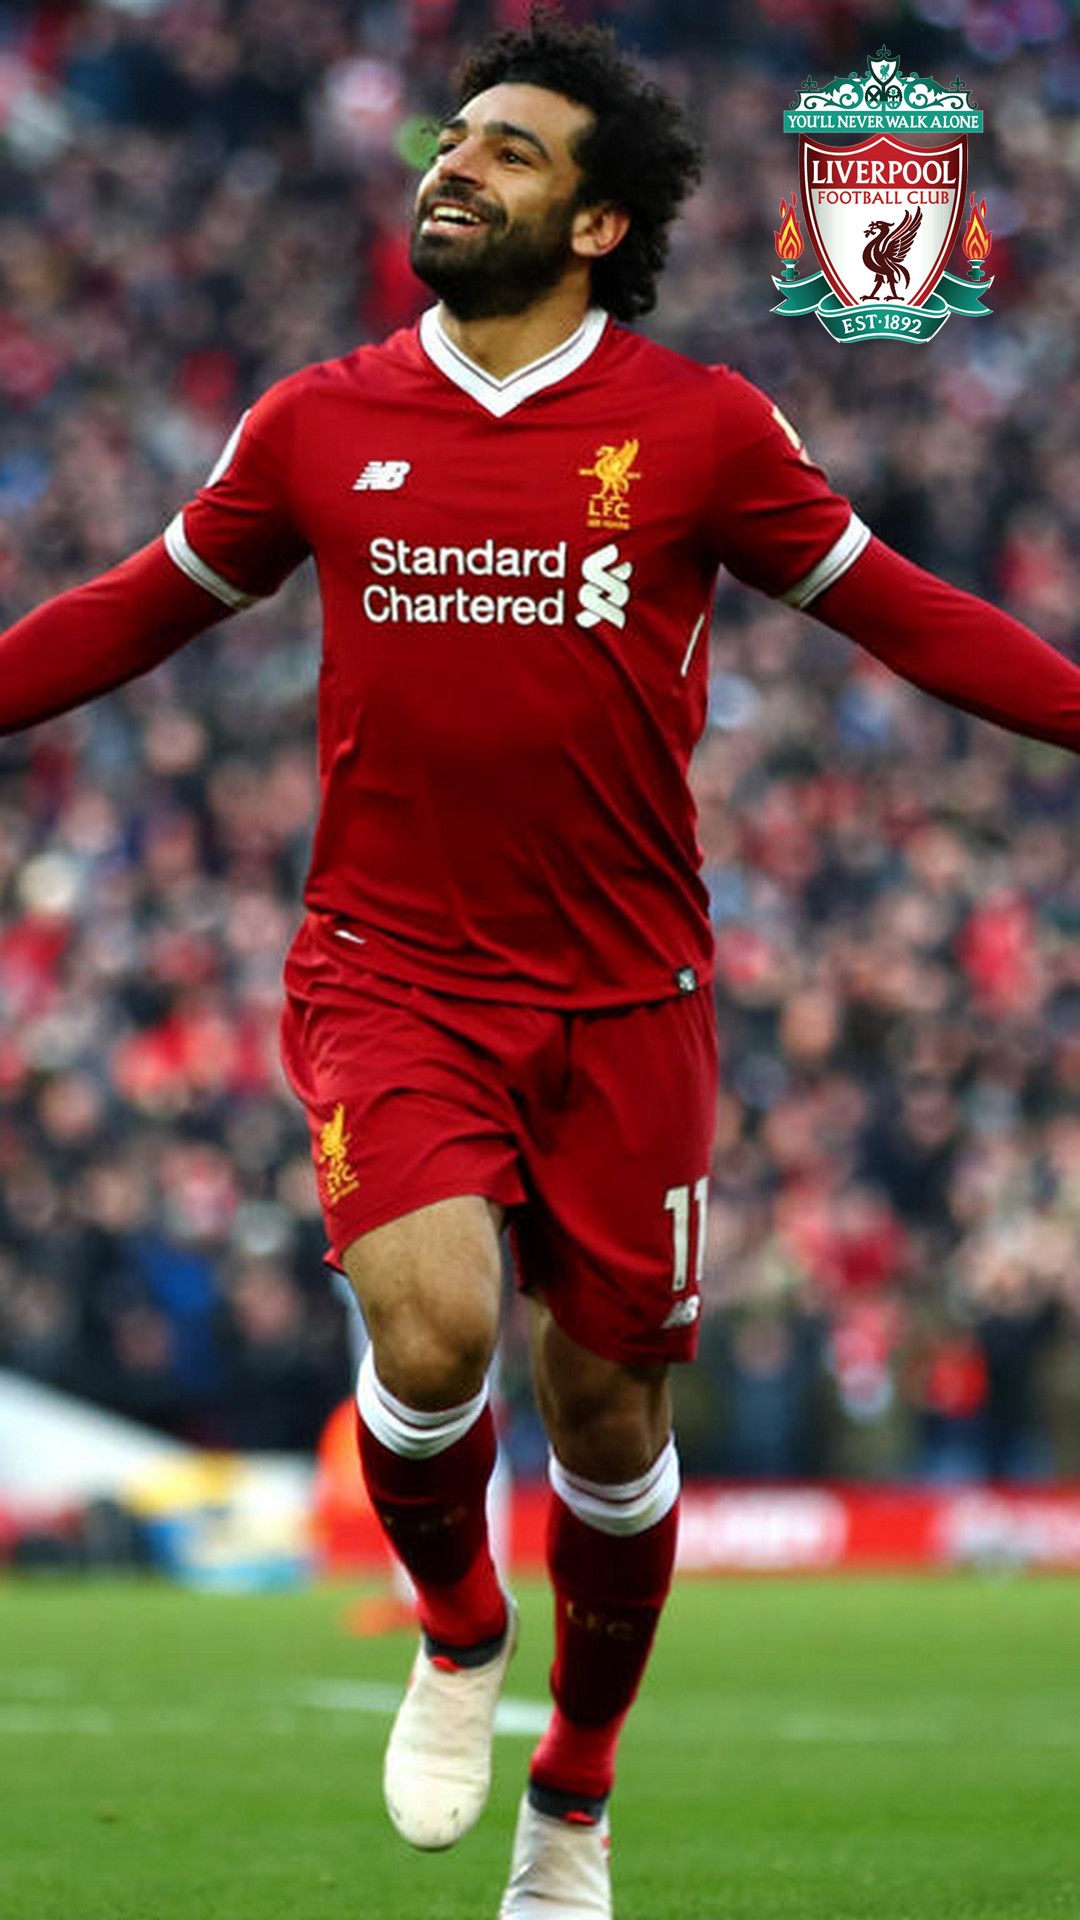 Liverpool Mohamed Salah Wallpaper For iPhone with image resolution 1080x1920 pixel. You can make this wallpaper for your iPhone 5, 6, 7, 8, X backgrounds, Mobile Screensaver, or iPad Lock Screen